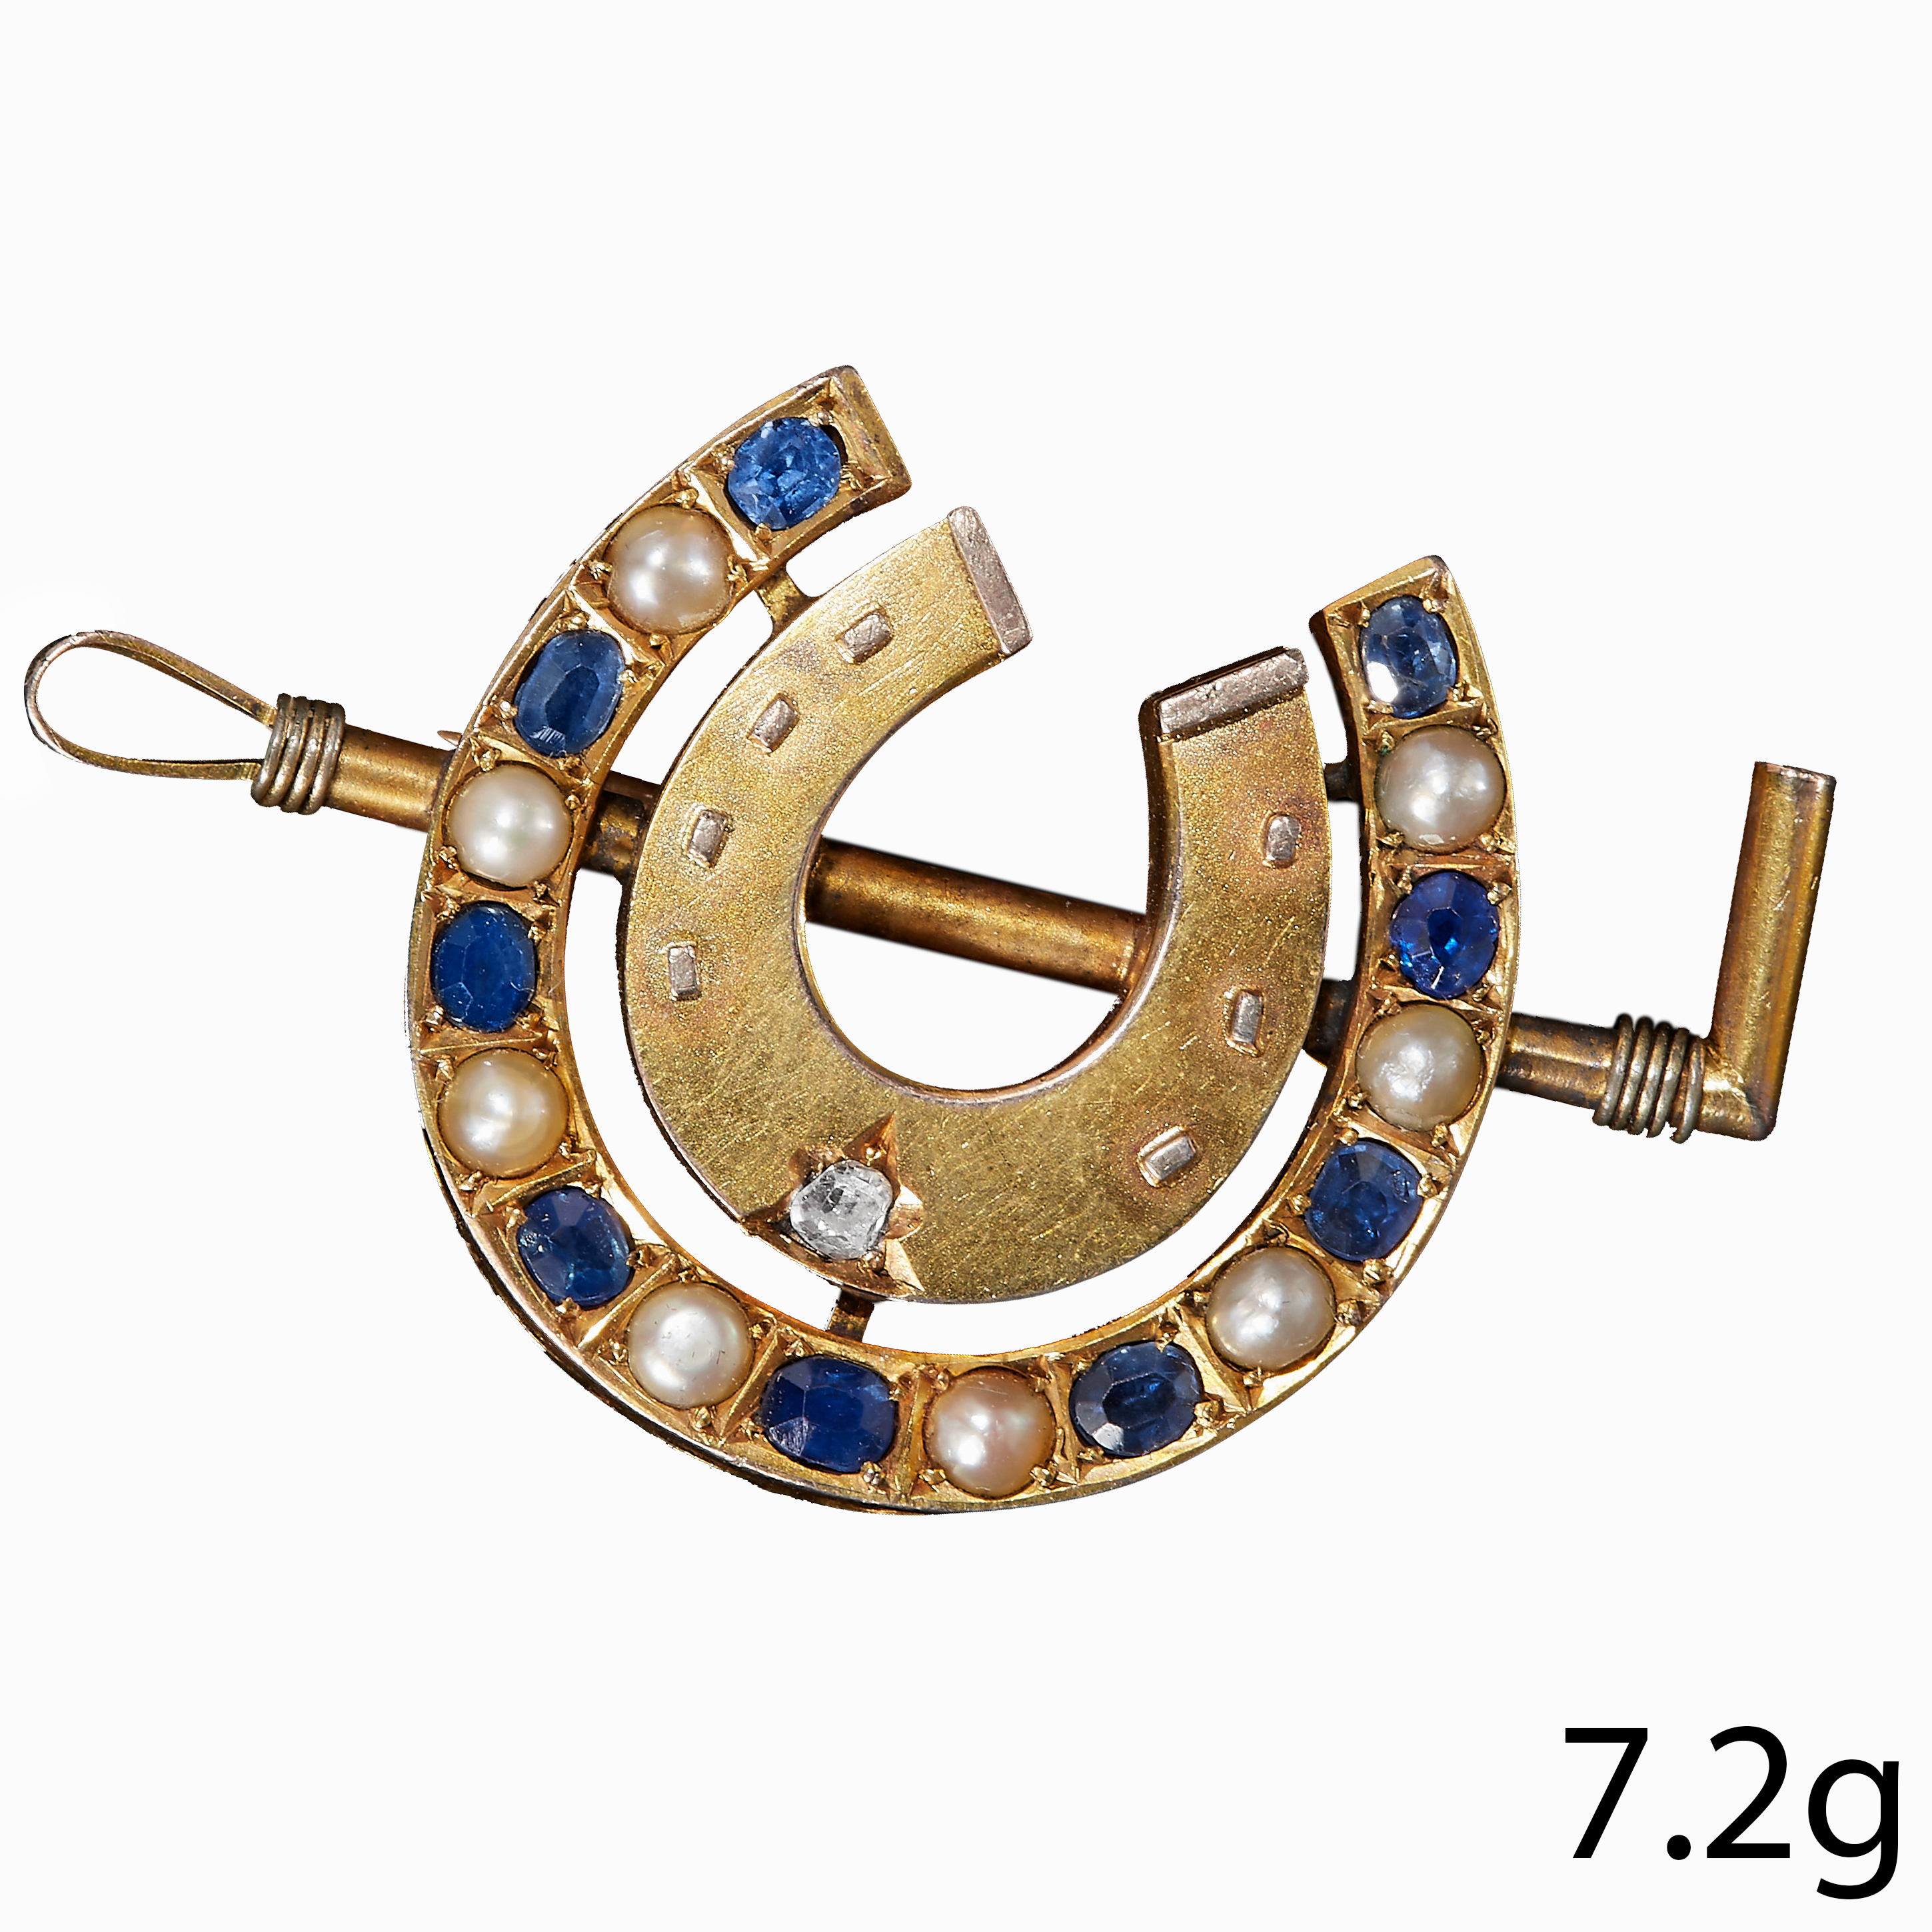 VICTORIAN SAPPHIRE PEARL AND DIAMOND HORSE SHOE AND RIDING CROP BROOCH